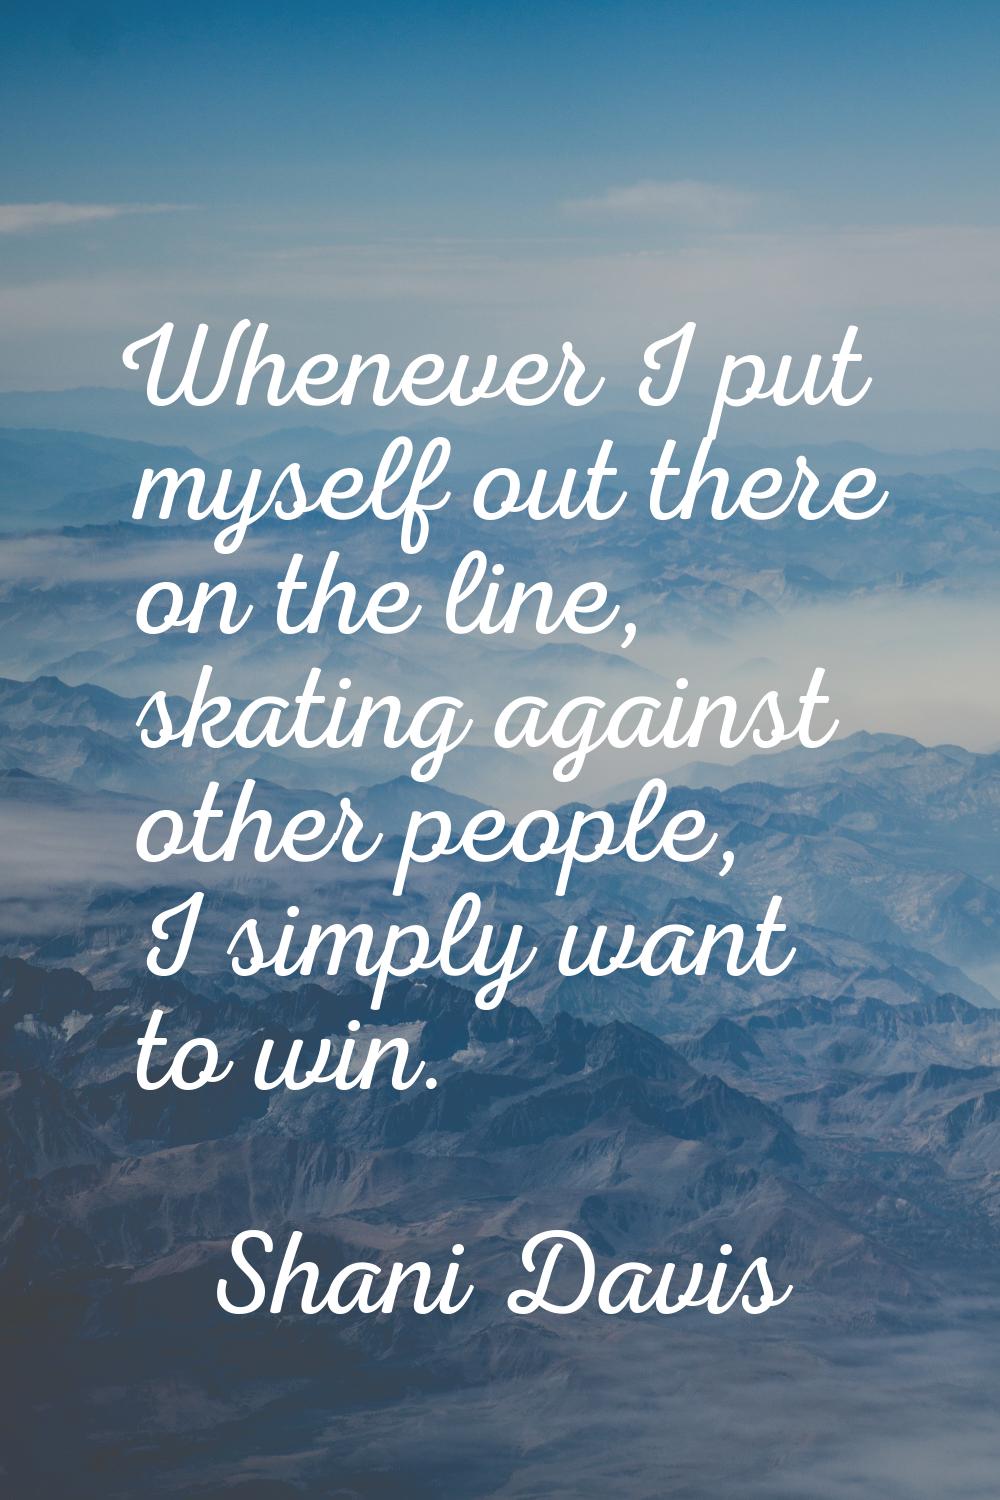 Whenever I put myself out there on the line, skating against other people, I simply want to win.